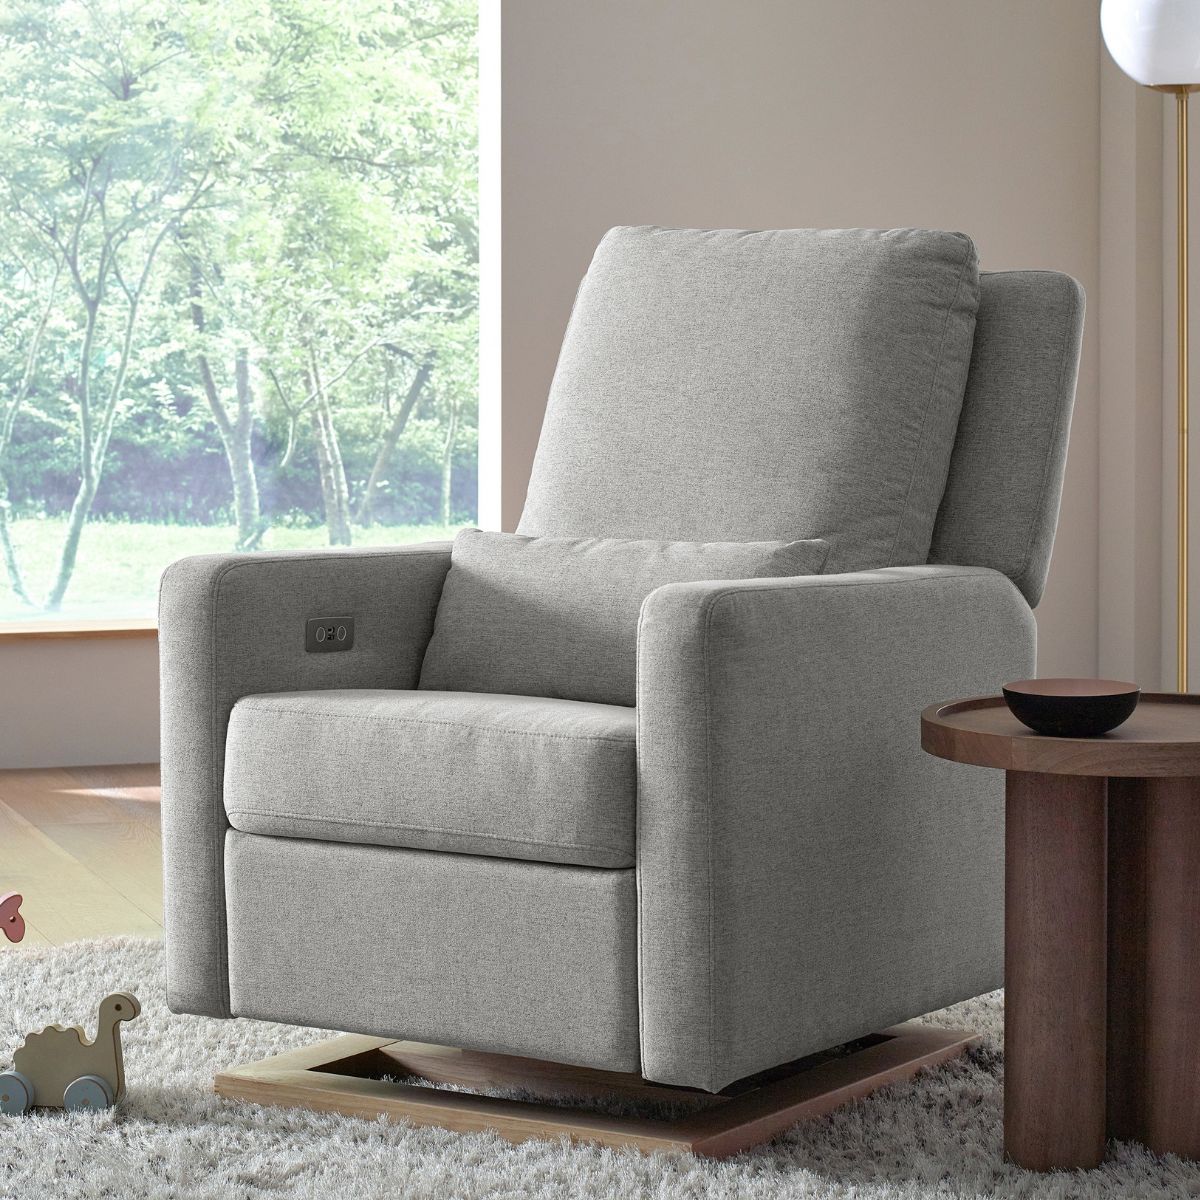 Babyletto Sigi Electronic Recliner and Glider with USB Port - Performance Grey Eco-Weave with Light Wood Base in home